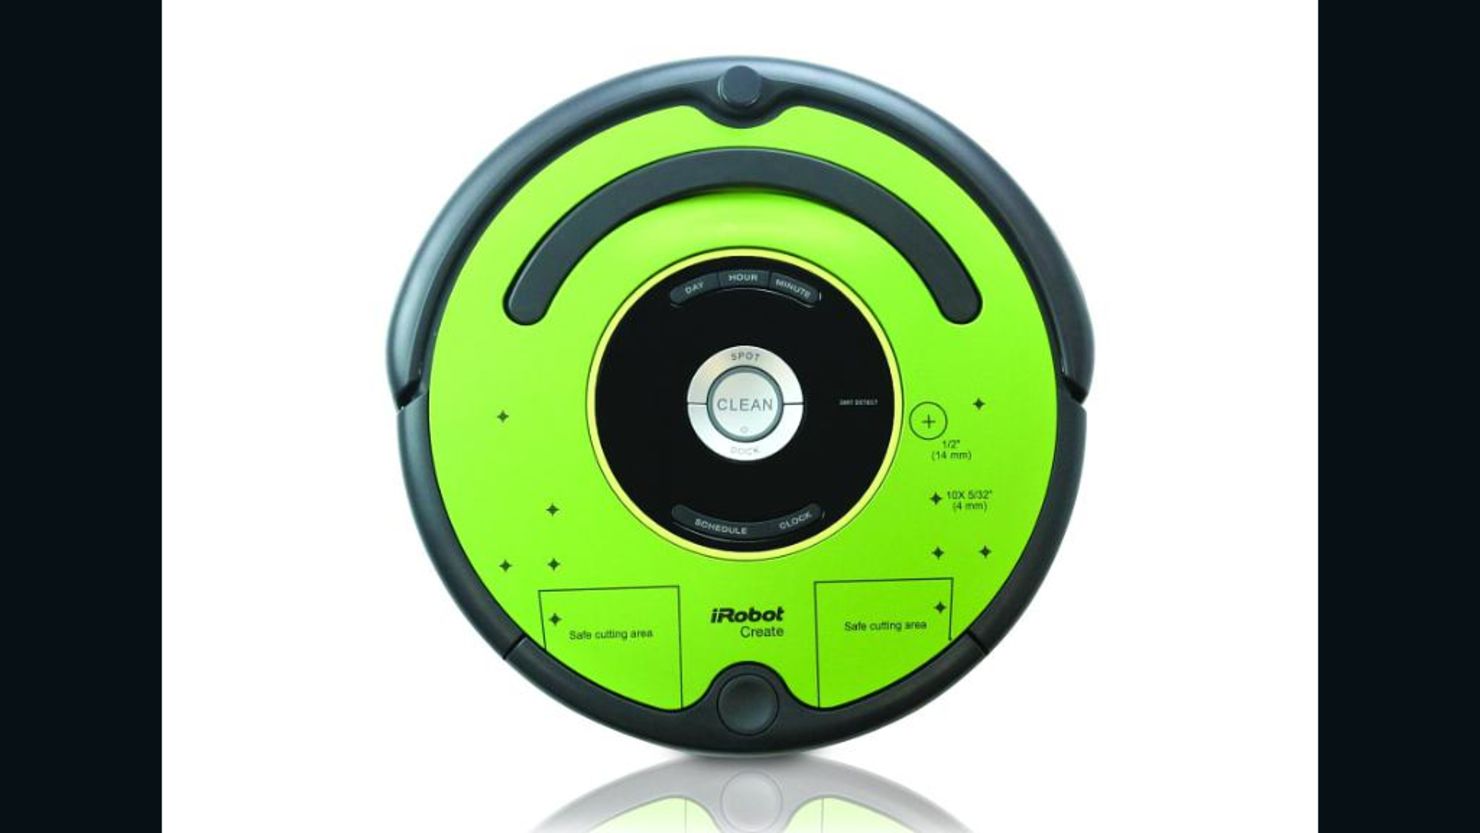 Create 2, a new release from Roomba makers iRobot, lets users program new behaviors and add additional hardware.